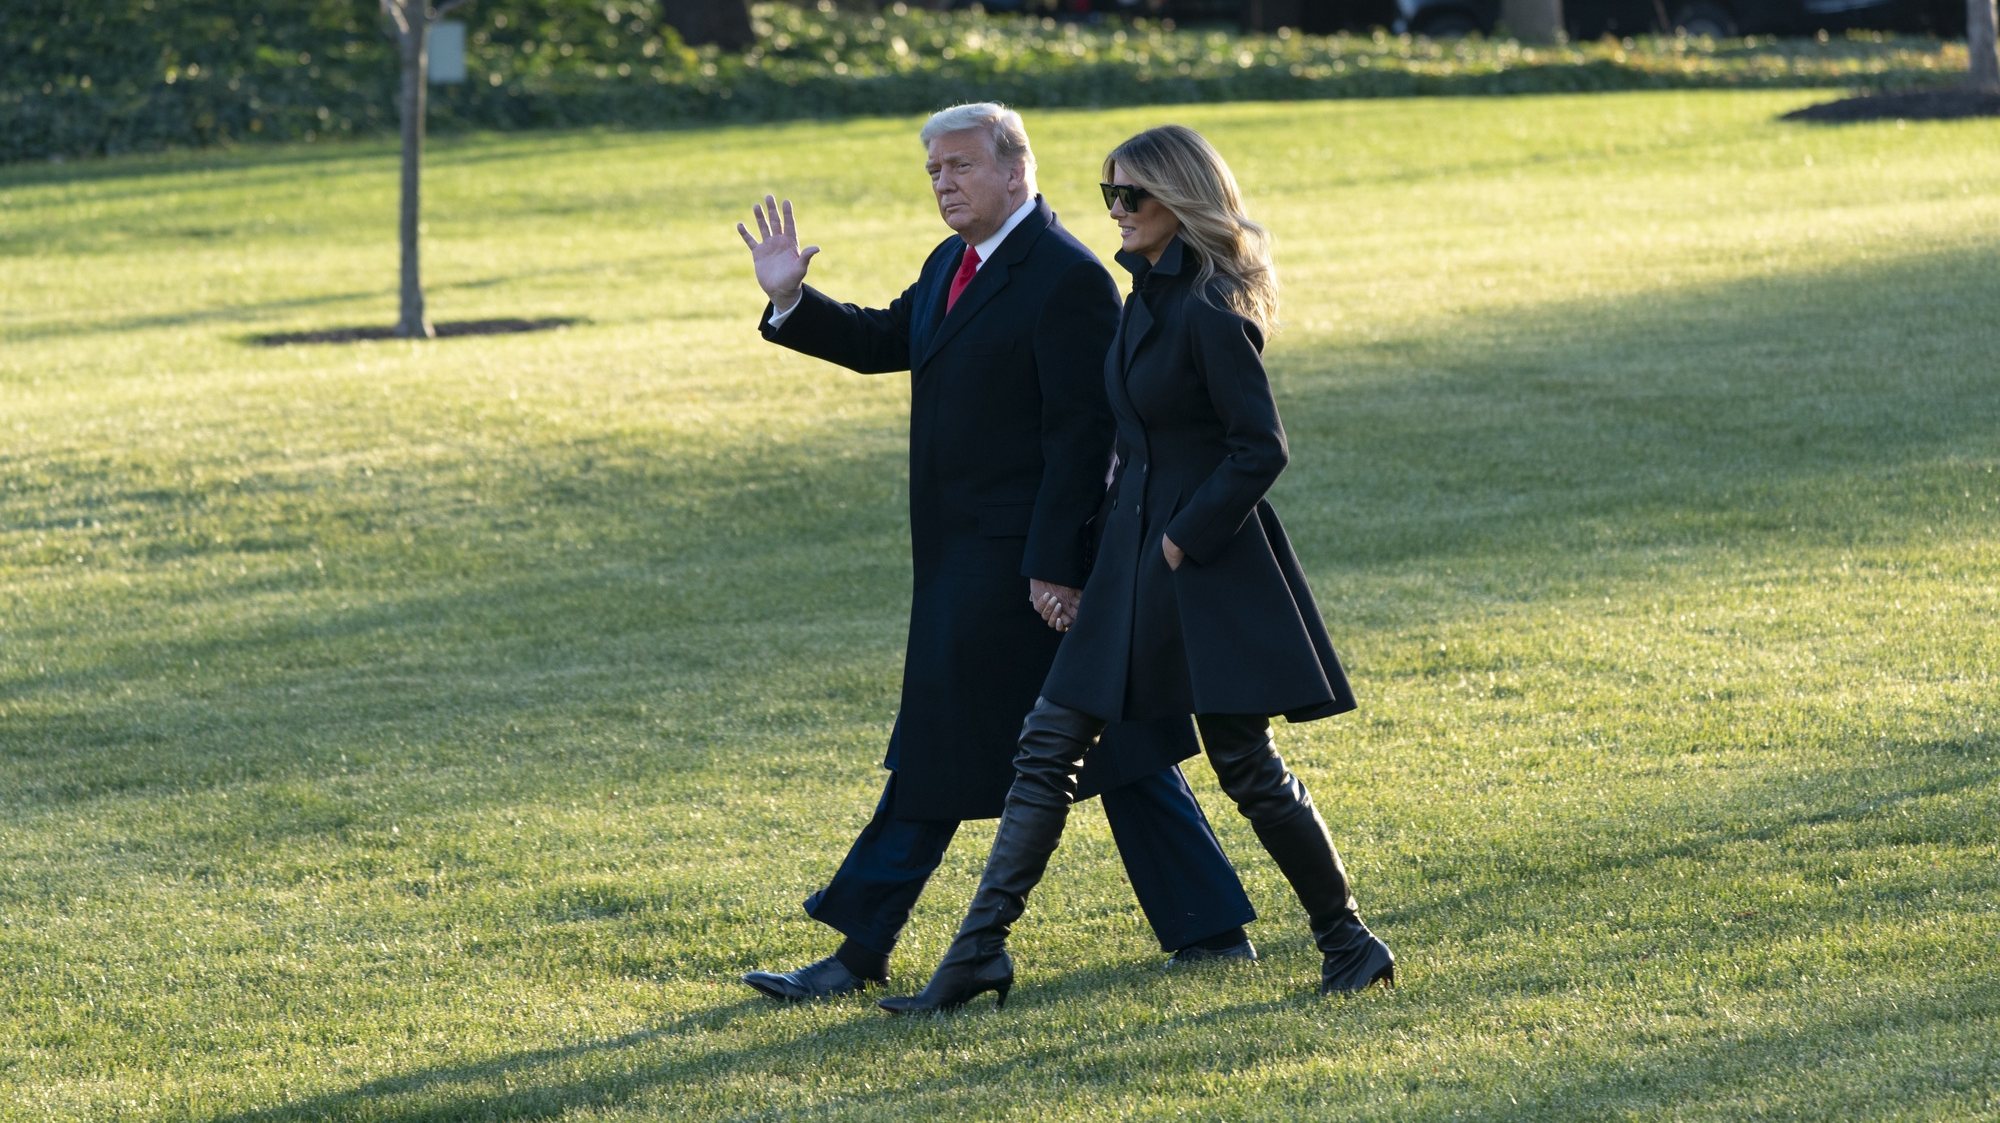 epa08901875 US President Donald J. Trump and First lady Melania Trump (R) depart the White House, in Washington, DC, USA, 23 December 2020, headed out to Mar-a-Lago in Palm Beach, Florida.  EPA/Chris Kleponis / POOL